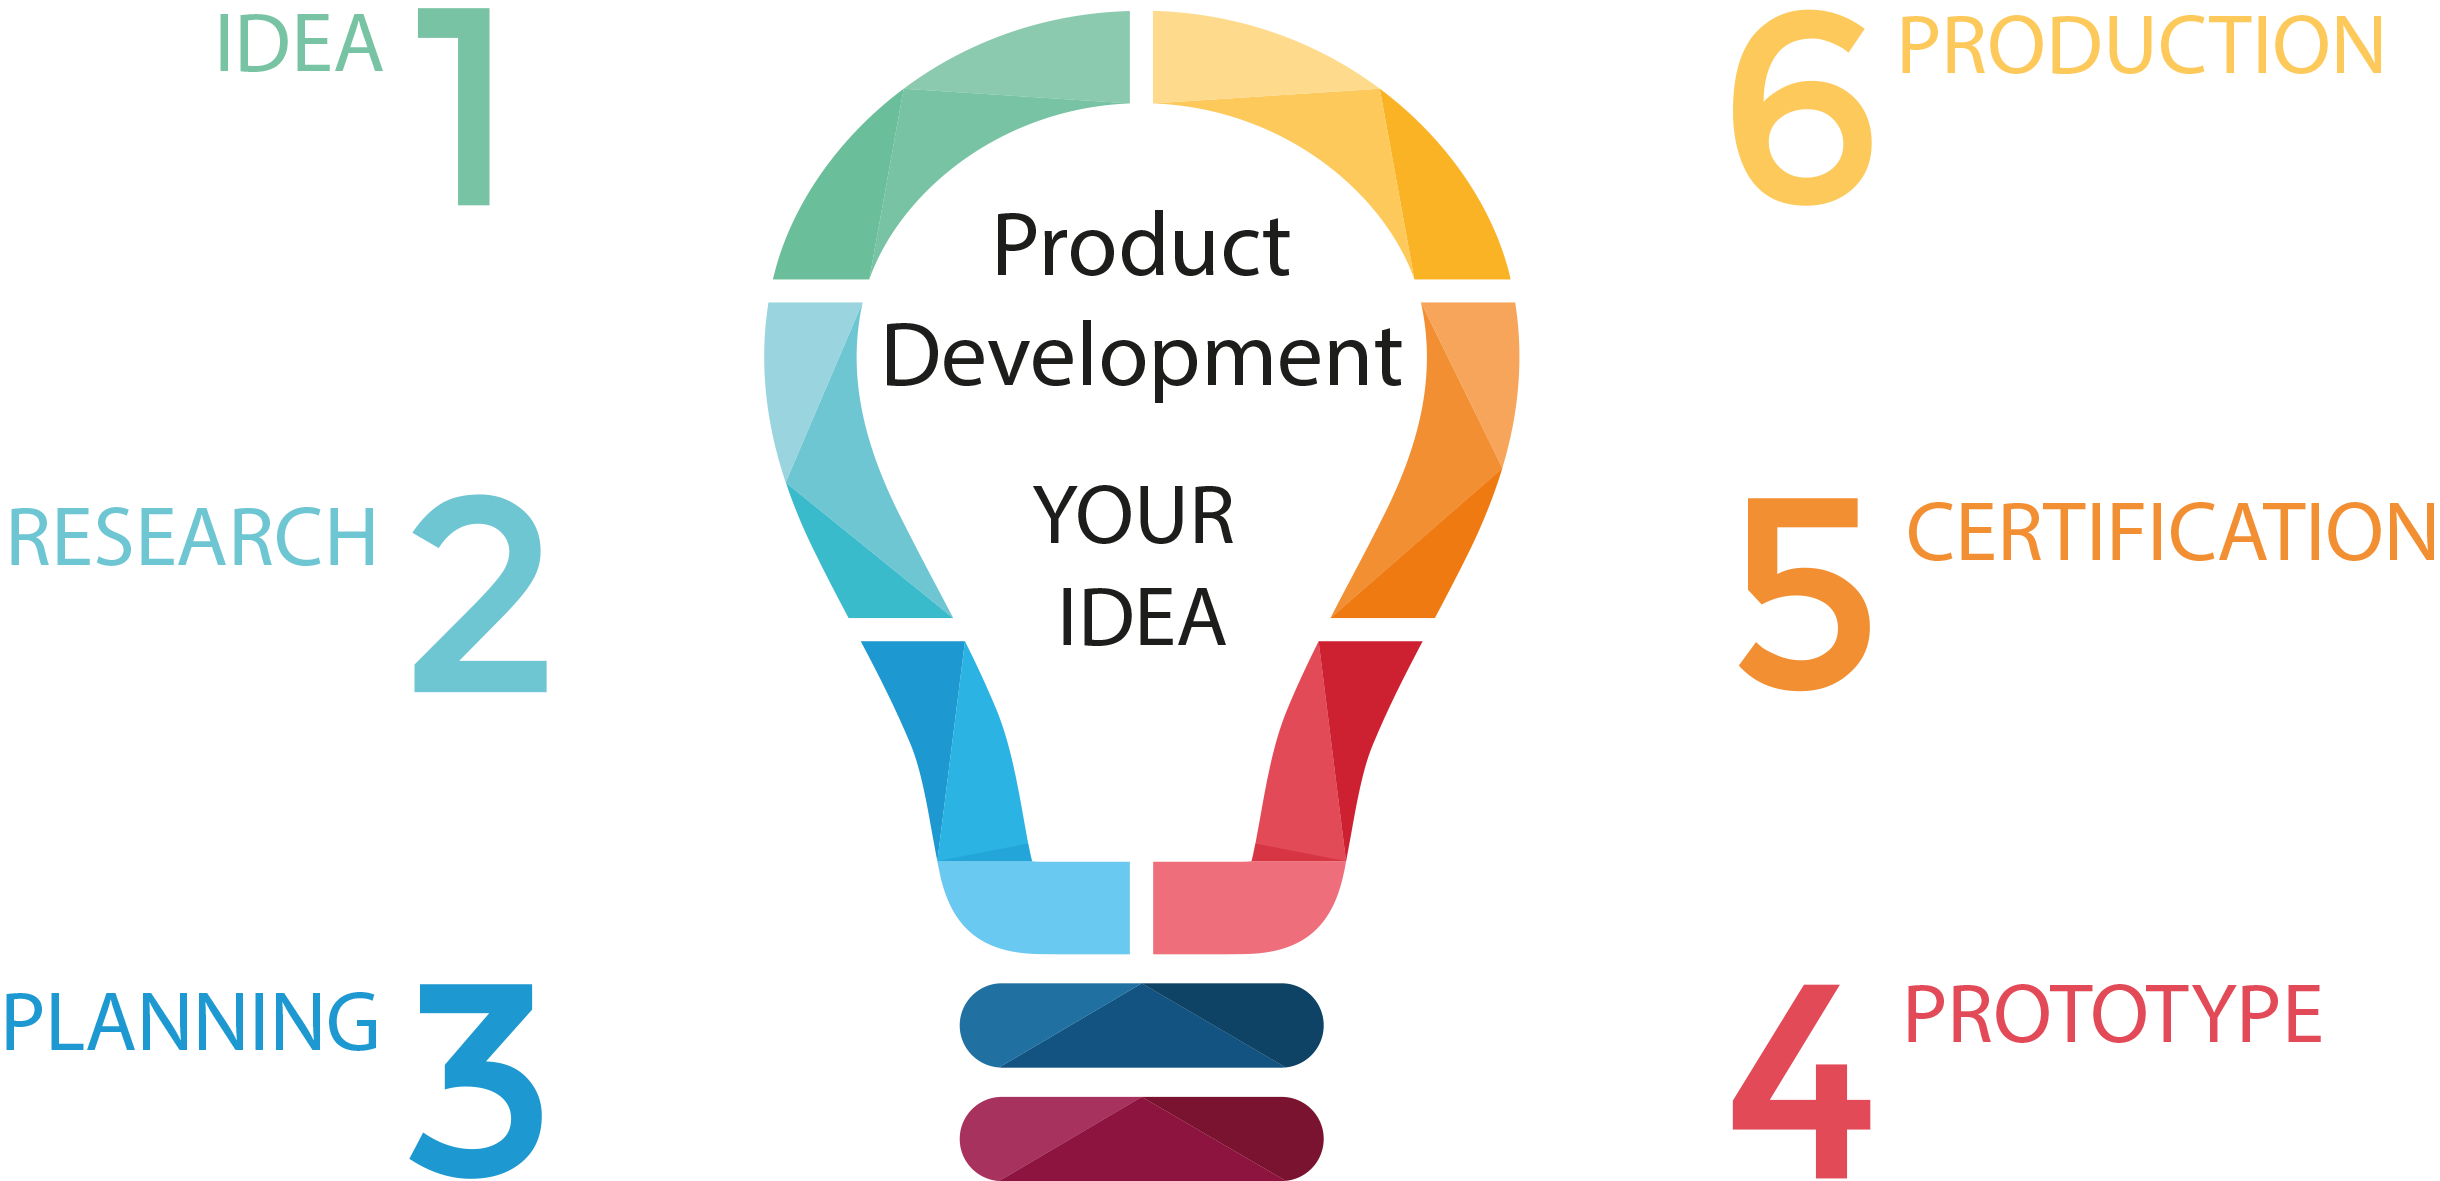 Product Development for your idea: 1. Idea, 2. Research, 3. Planning, 4. Prototyp, 5. Certification, 6. Production